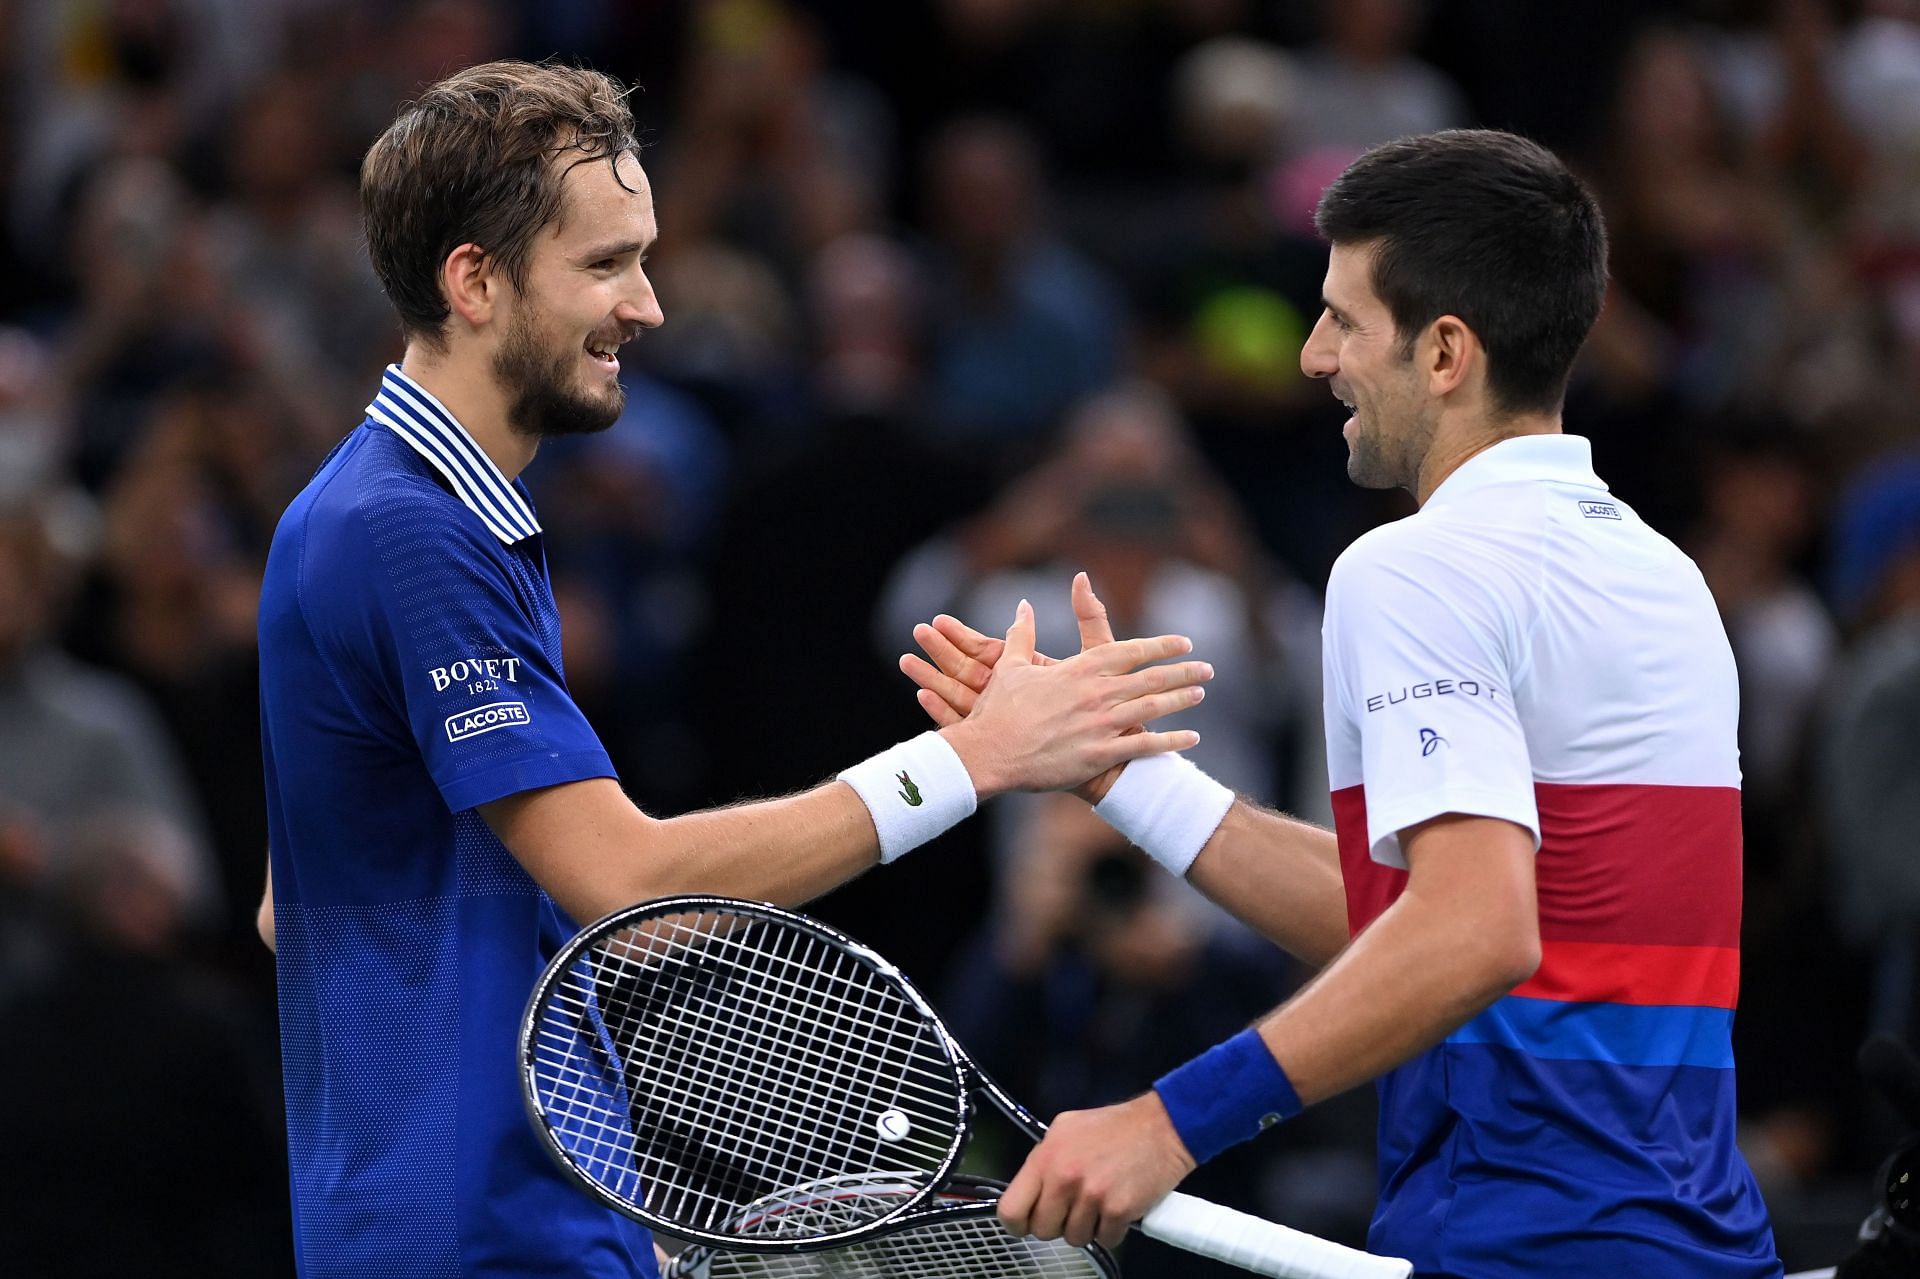 Novak Djokovic and Daniil Medvedev will battle it out for the top spot in the ATP rankings next week